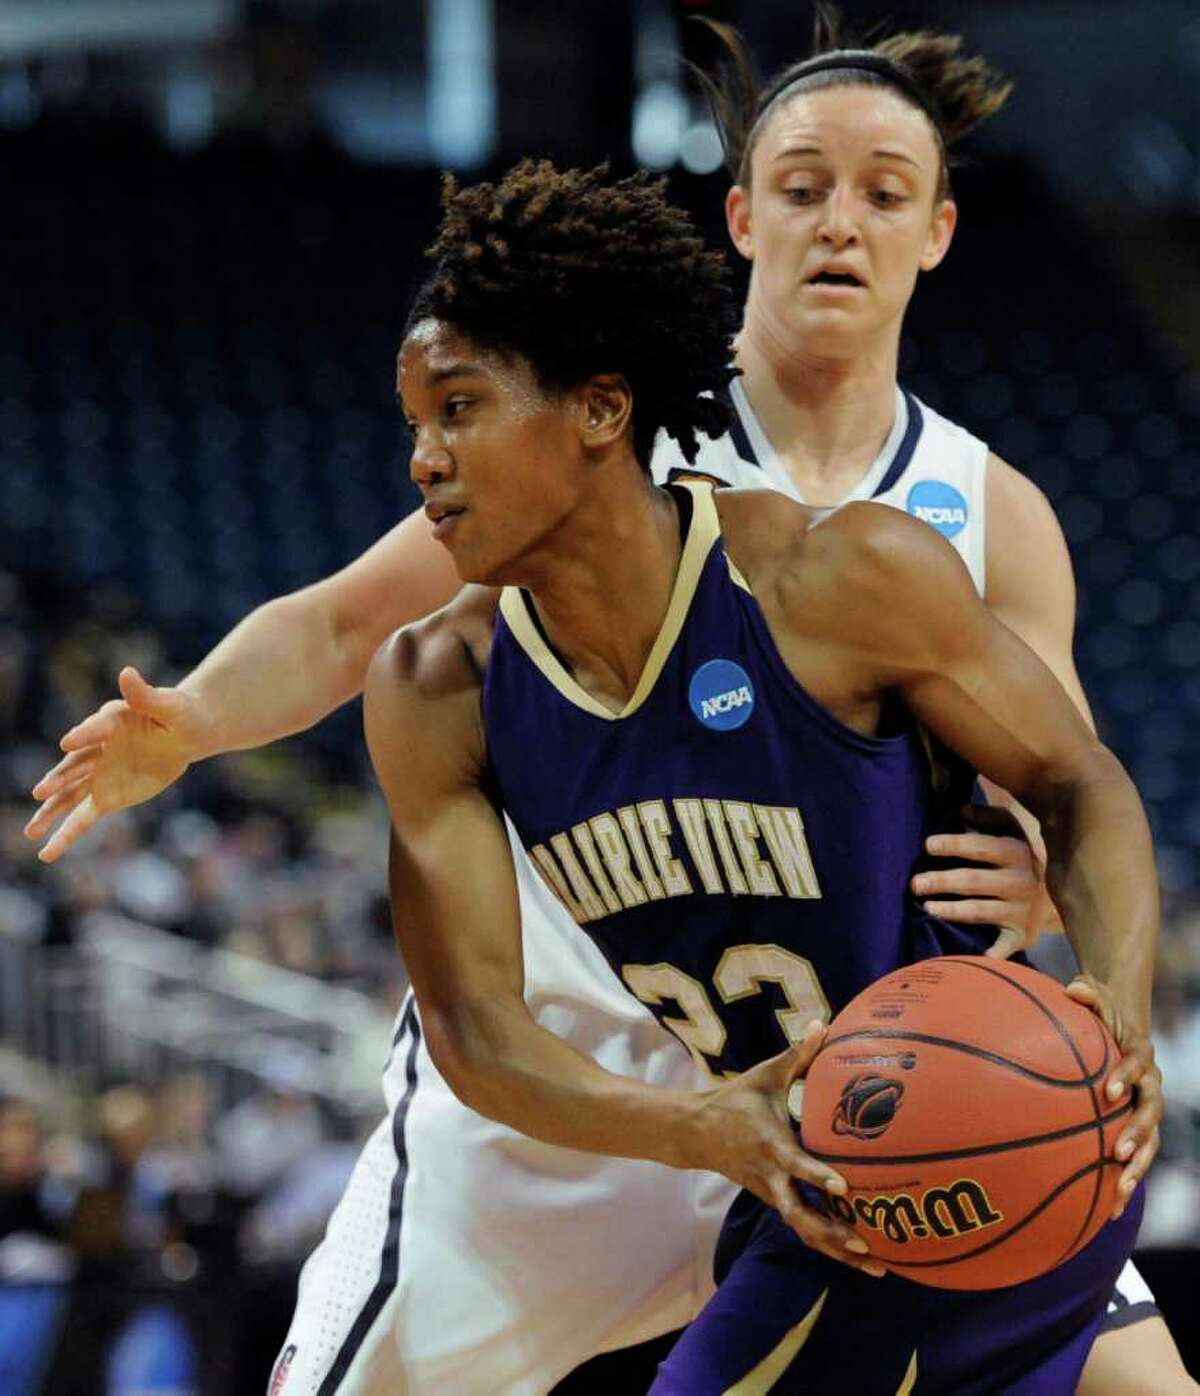 Prairie View A&M's Latia Williams, front, is guarded by Connecticut's Kelly Faris, back, during the first half of an NCAA tournament first-round college basketball game in Bridgeport, Conn., Saturday, March 17, 2012. (AP Photo/Jessica Hill)